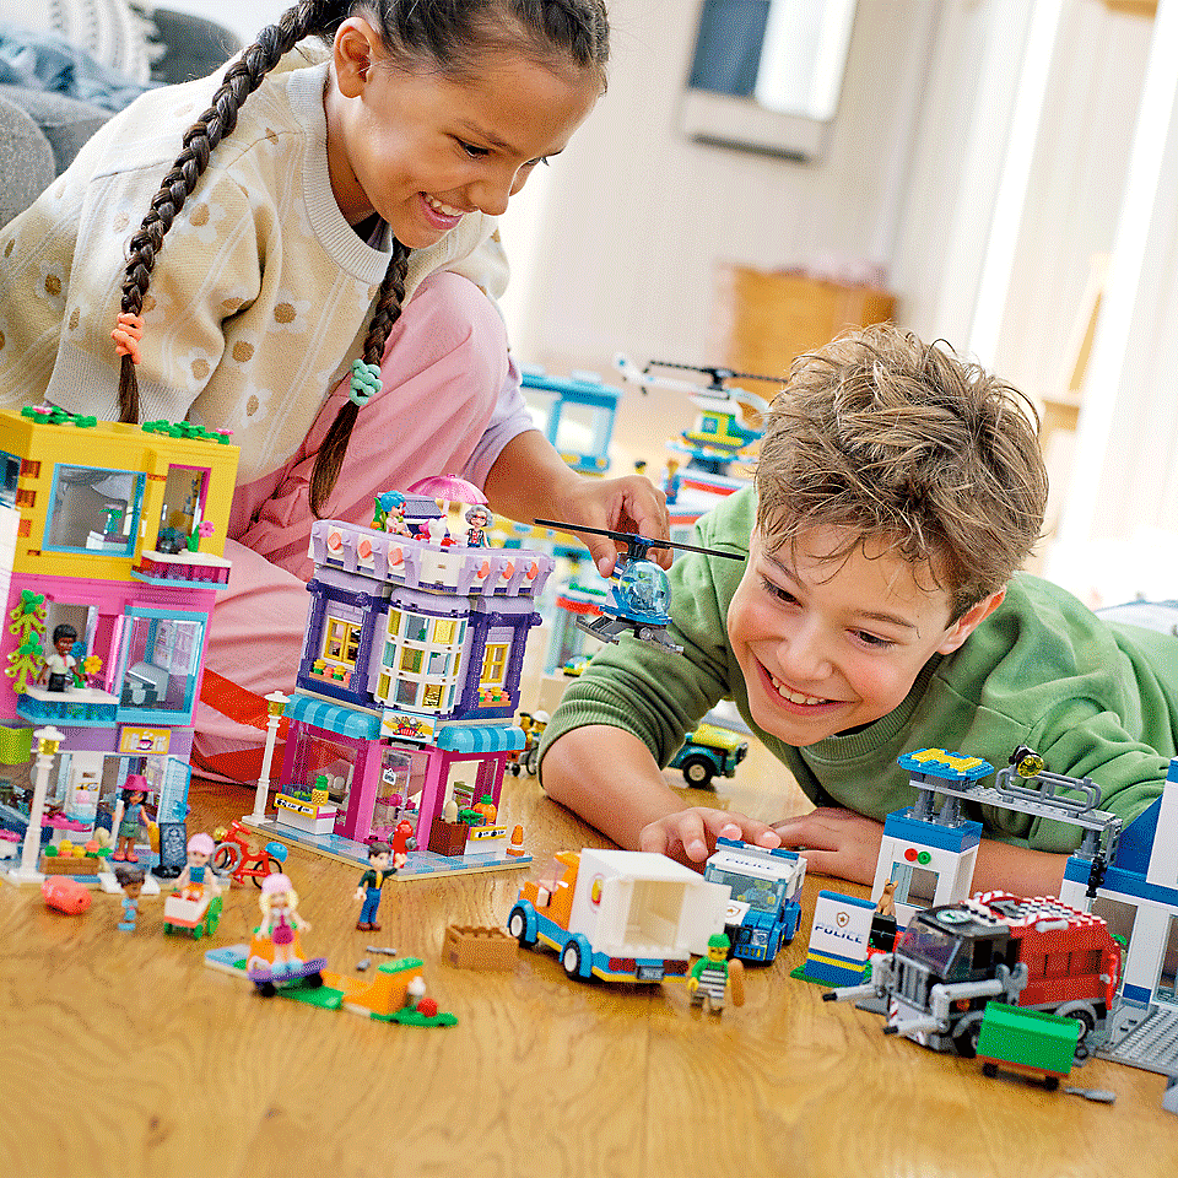 Shop new LEGO sets from LEGO City and LEGO Friends